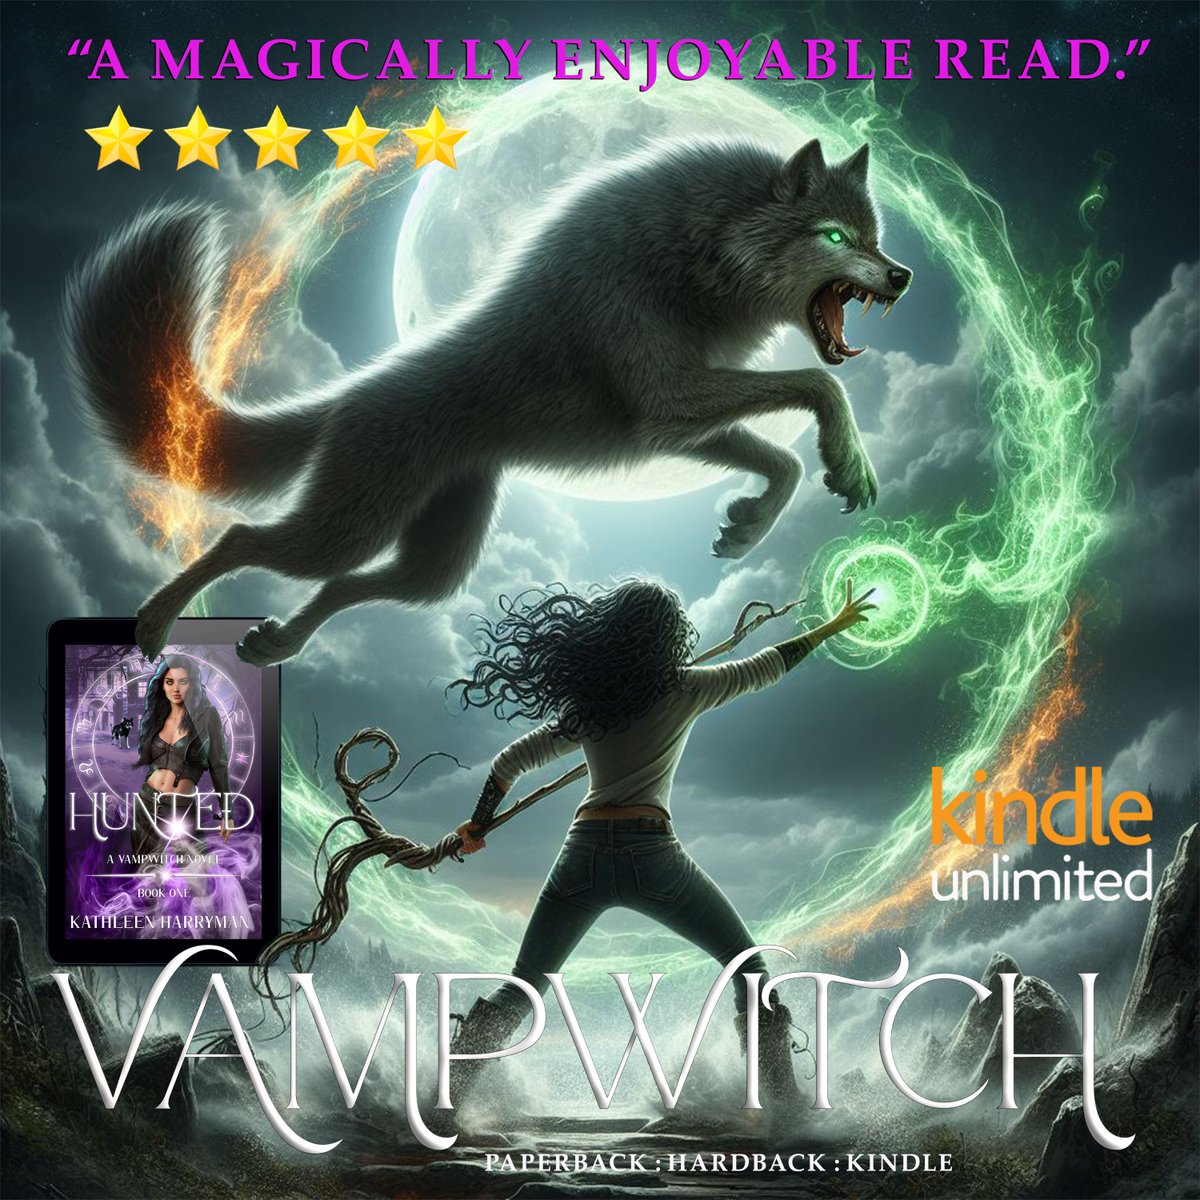 #BookReview 'Hunted: A Vampwitch Novel is a catchy and moving fantasy novel that is the perfect read.” #KU #Kindle #Paperback Release your inner #Vampwitch mybook.to/HUNTED-BK1 #paranormalromance #paranormal #supernatural #fantasy #vampires #witches #werewolves #IARTG